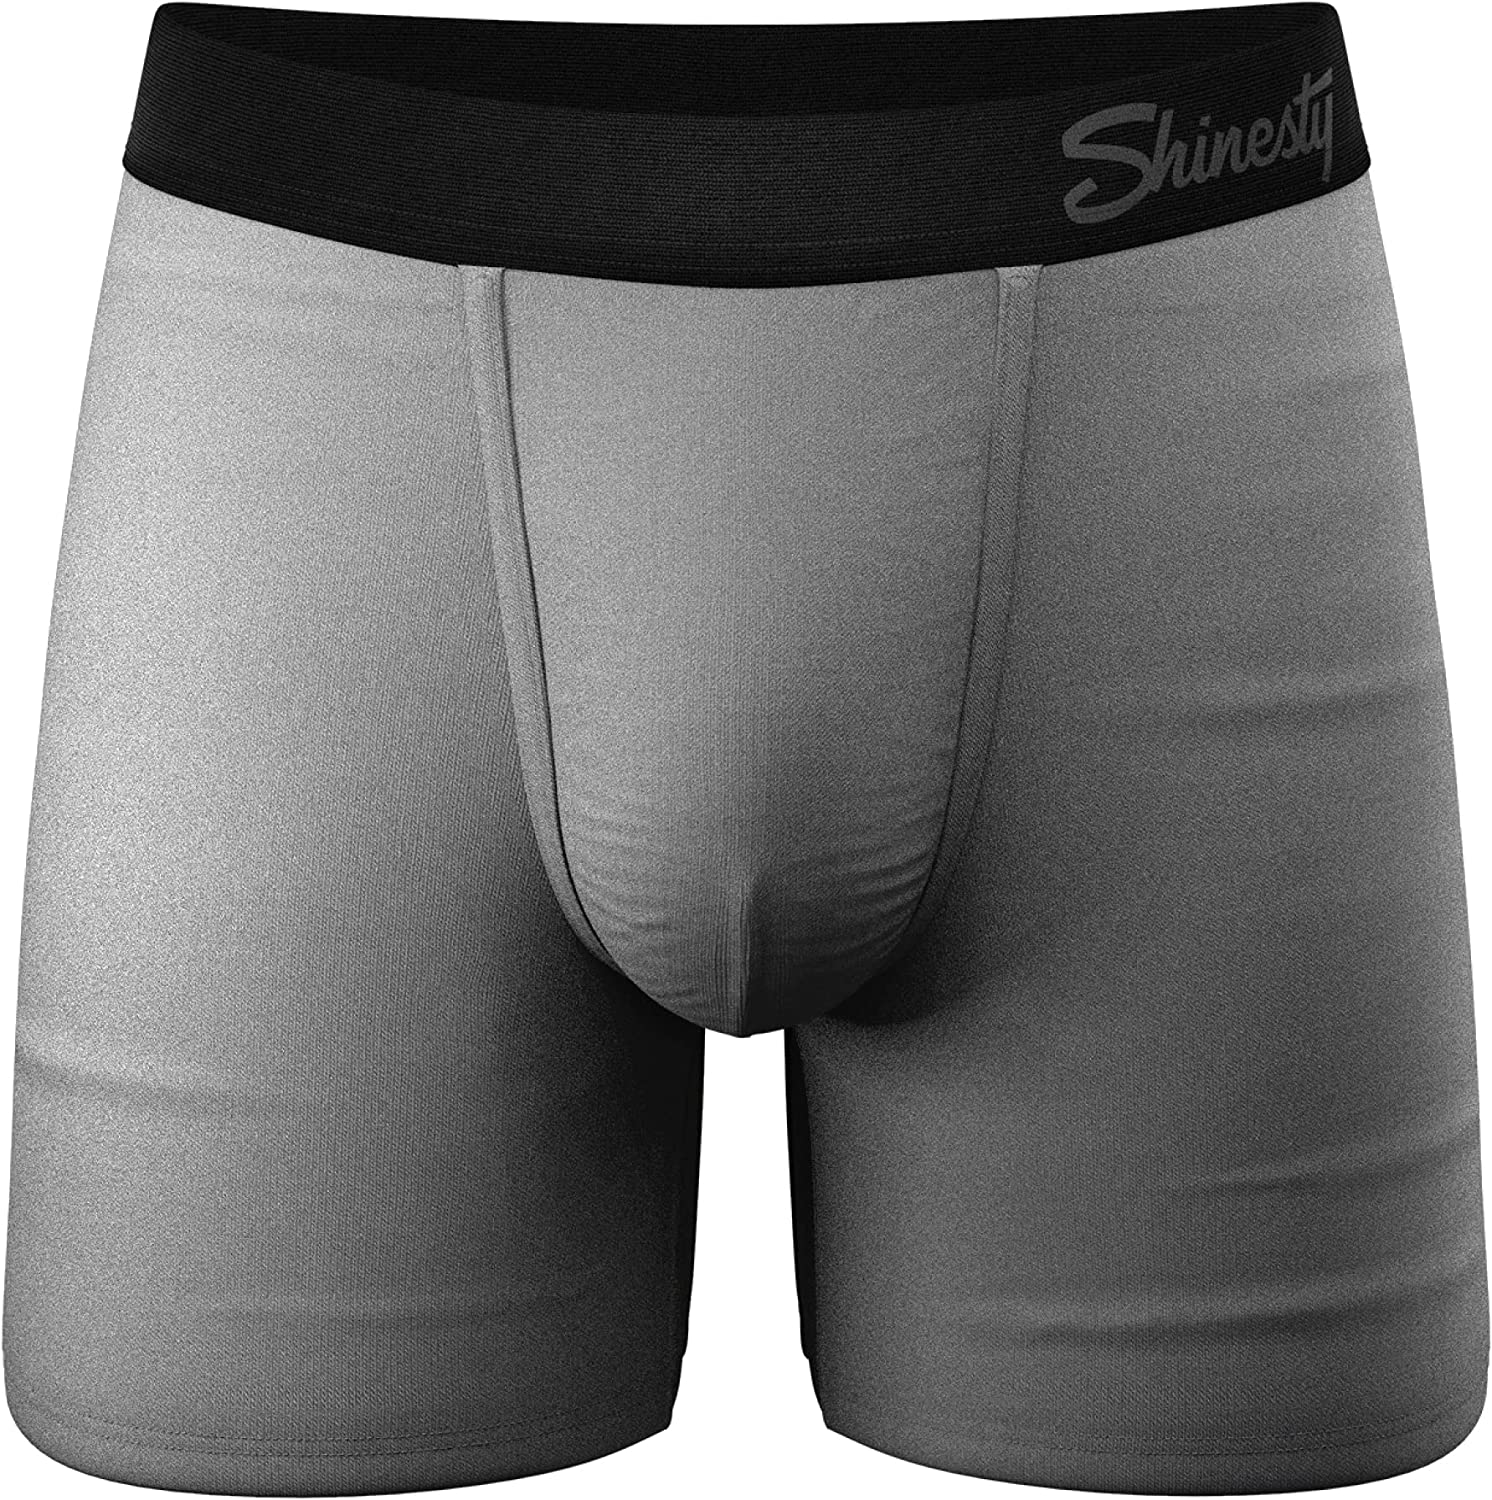  Shinesty Hammock Support Bulge Pouch Boxer Briefs Big And  Tall Underwear For Men